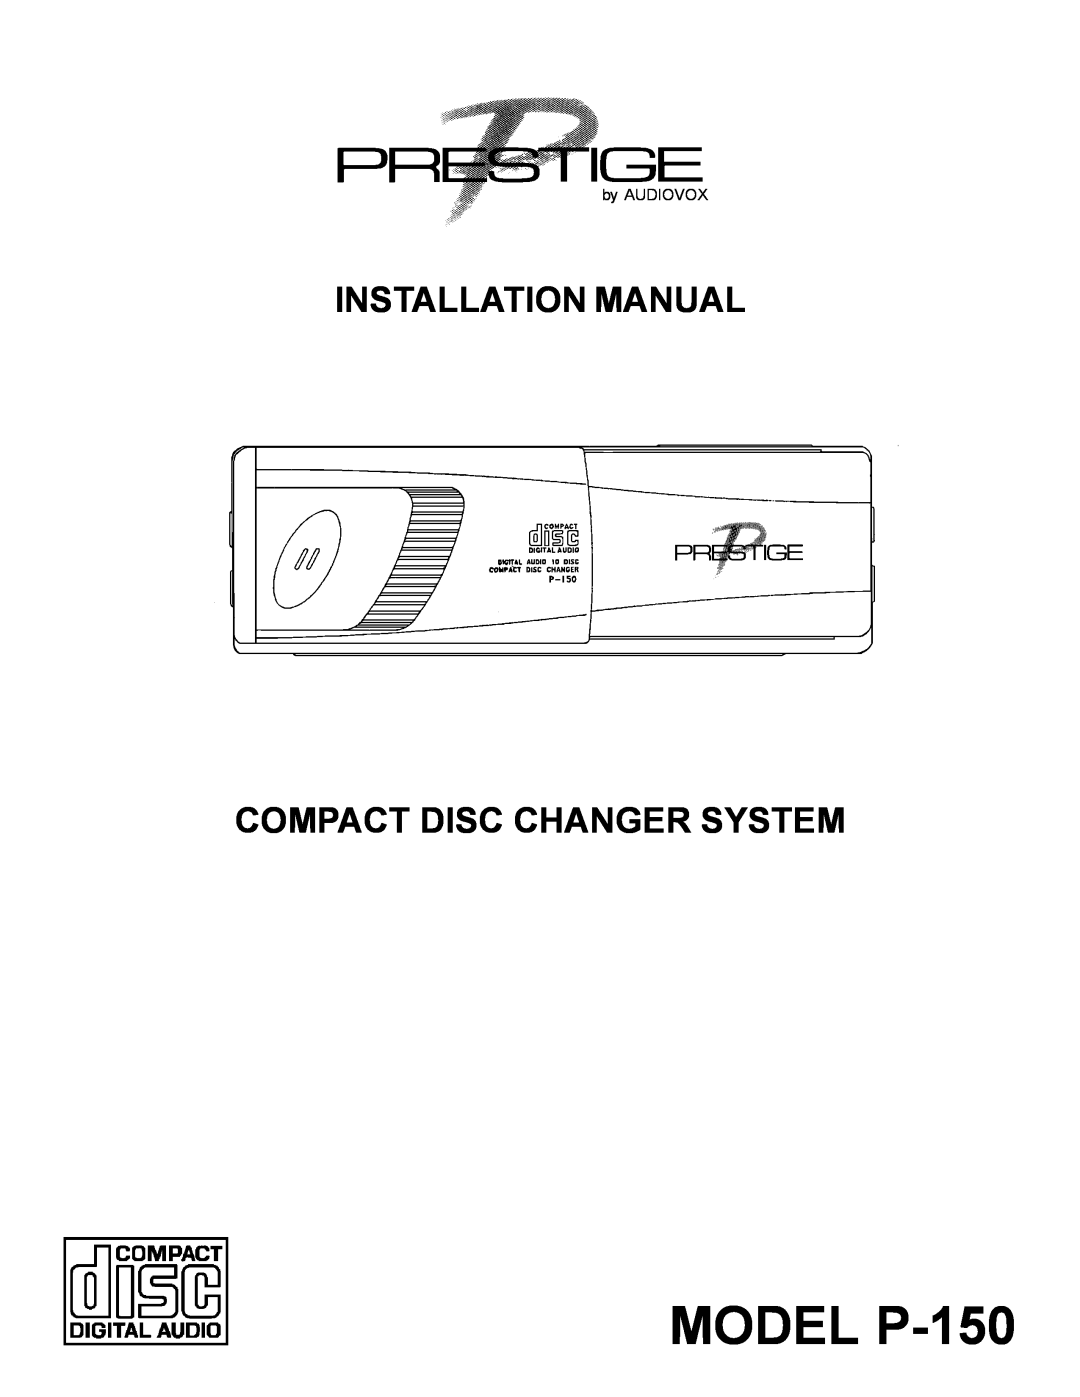 Audiovox AUDIOVOX COMPACT DISC CHANGER SYSTEM installation manual MODEL P-150 